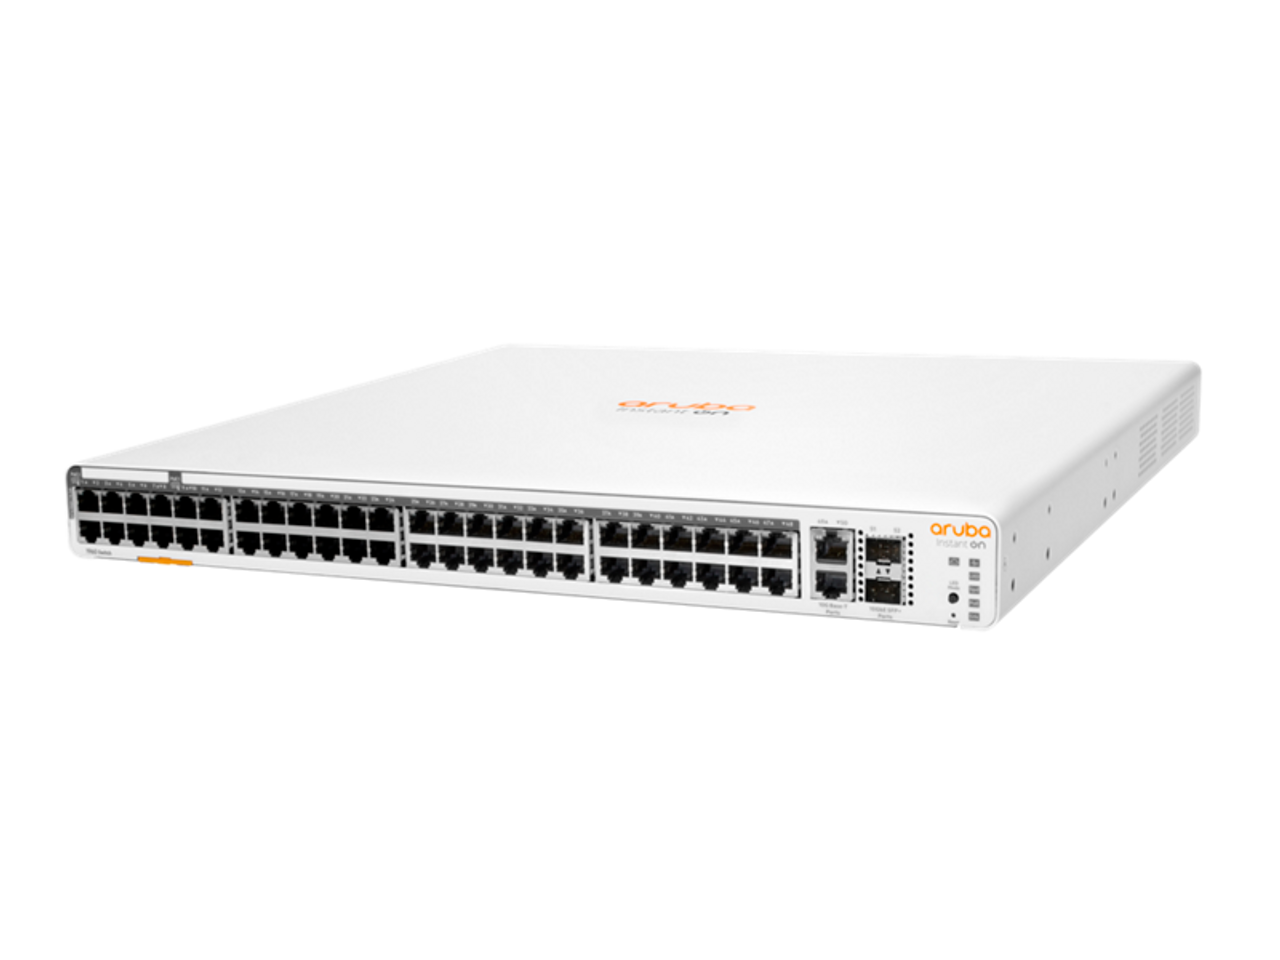 Aruba Instant On 1960 48-Port Gigabit PoE 600W CL4 CL6 Stackable Layer 2+ Smart Managed Switch With 2x10G & 2x10G SFP+